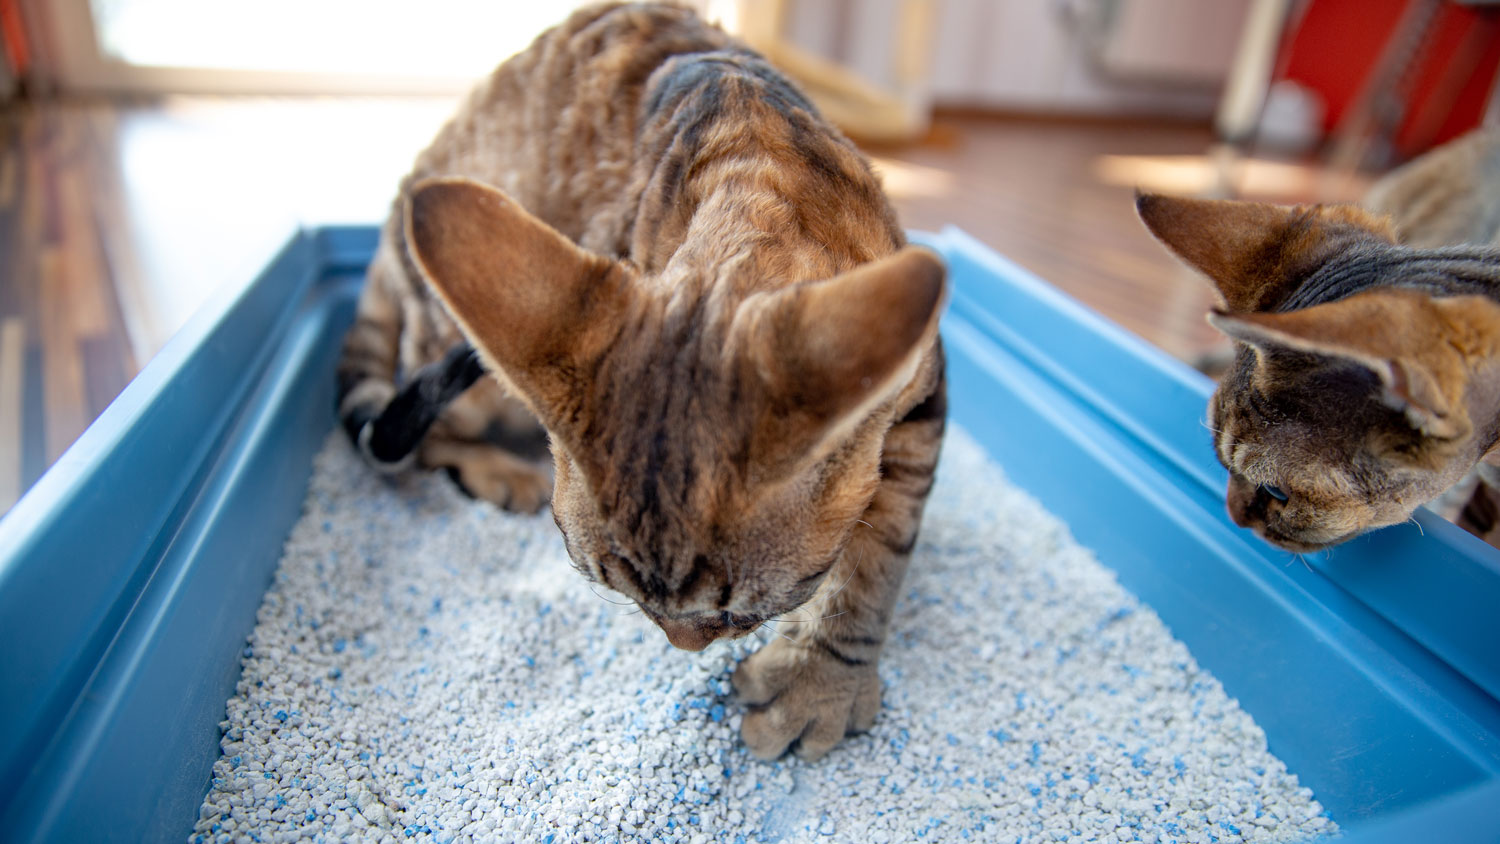 Devon Rex kitten digging sand in litter box while being watched by curious brother